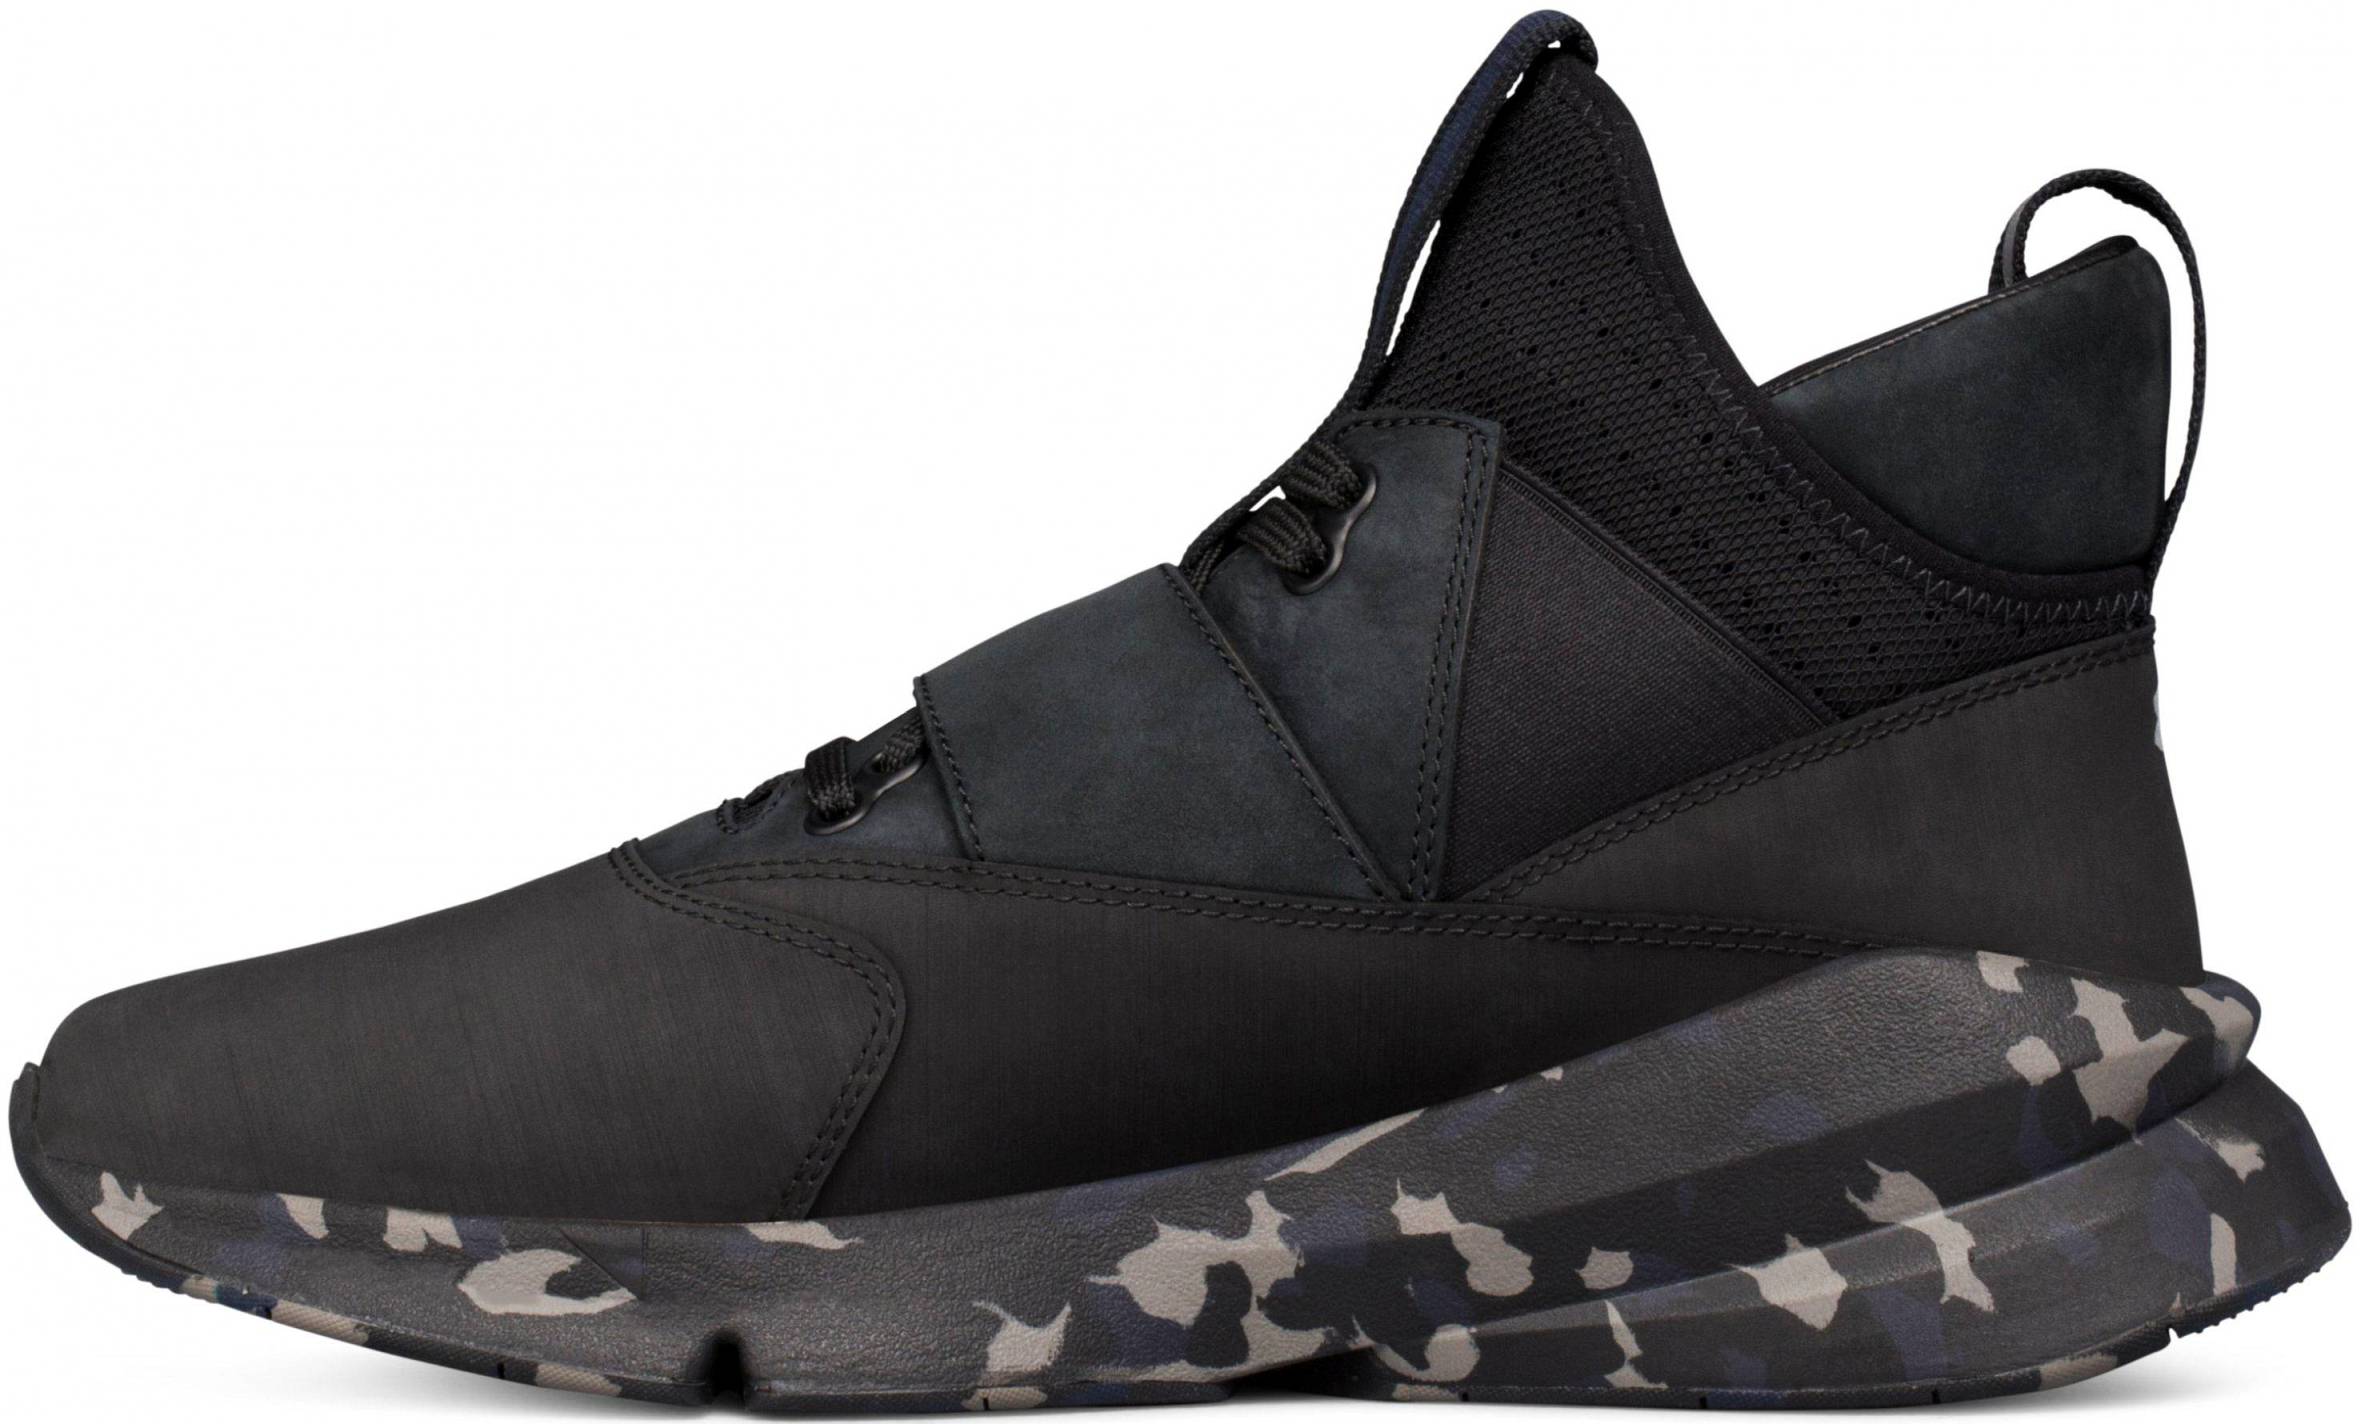 Under Armour Sportswear 1 Mid Camo Shoes Reviews